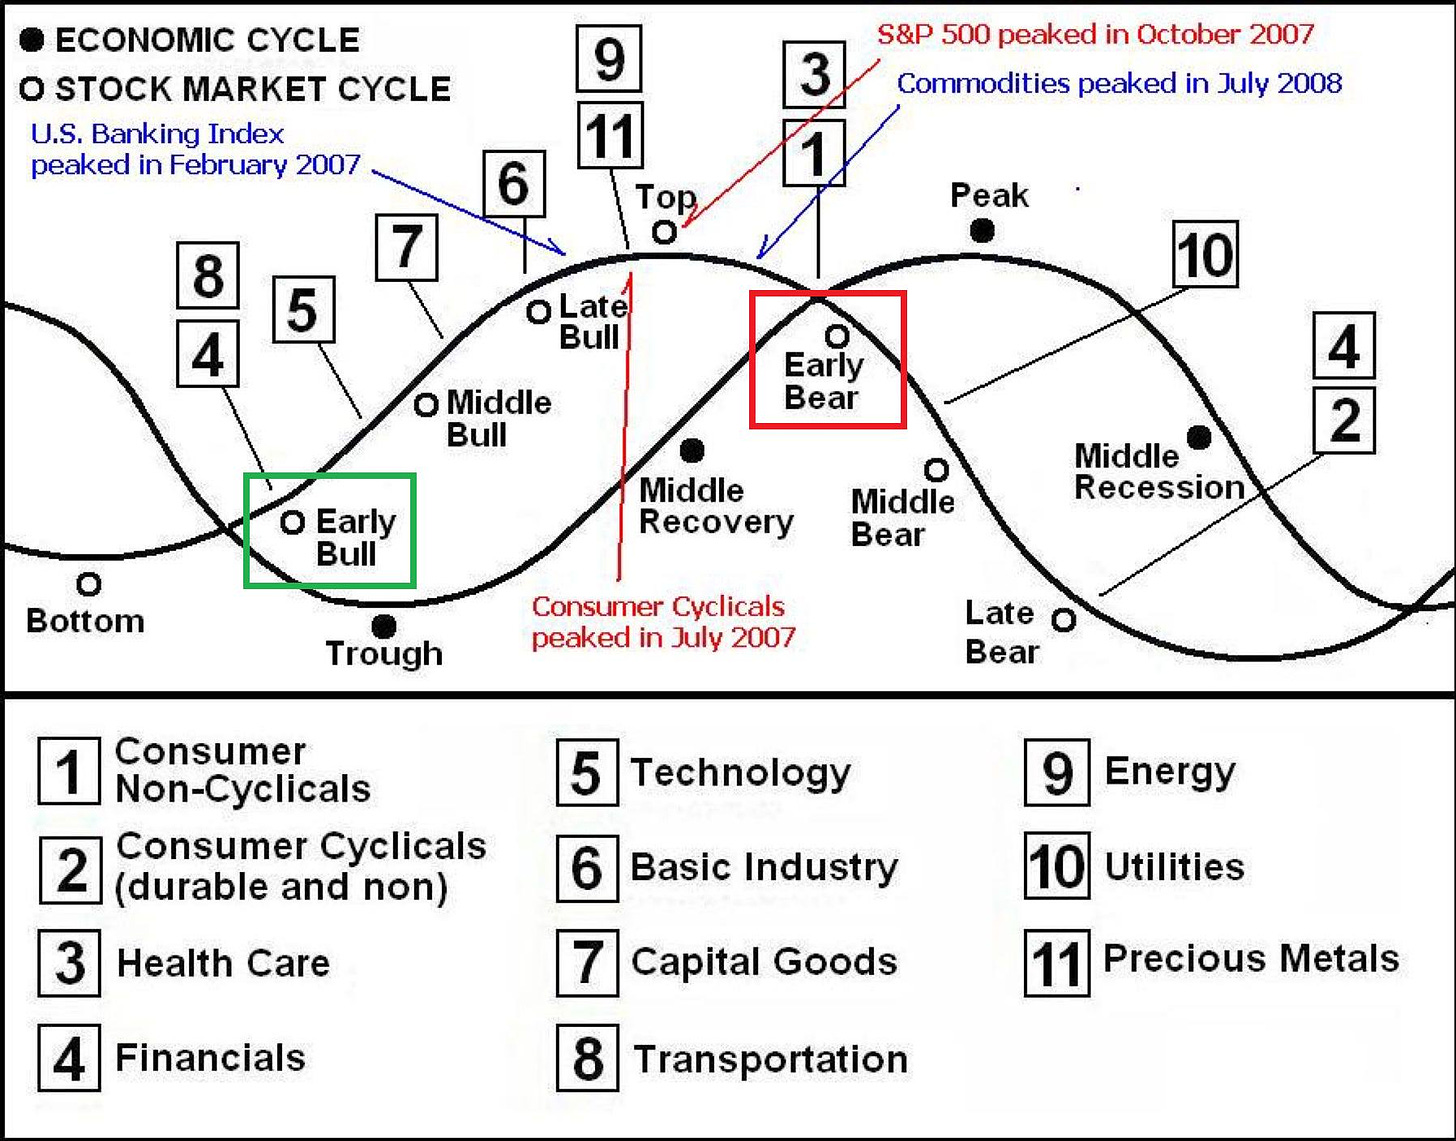 May be an image of blueprint and text that says 'ECONOMIC CYCLE o STOCK MARKET CYCLE U.S. Banking Index peaked in February 2007 11 S&P 500 peaked in October 2007 Commodities peaked in July 2008 6 3 1 8 Top 7 5 Peak 4 OLate Bull O Middle Bull 10 Early Bear O Early Bull Bottom Middle Recovery 4 2 Middle Bear Middle Recession Trough Consumer Cyclicals peaked in July 2007 Late Bear Consumer Non-Cyclicals 2 (durable and non) Consumer Cyclicals 5 Technology 3 Health Care Energy Basic Industry 10 Utilities Financials Capital Goods Precious Metals Transportation'